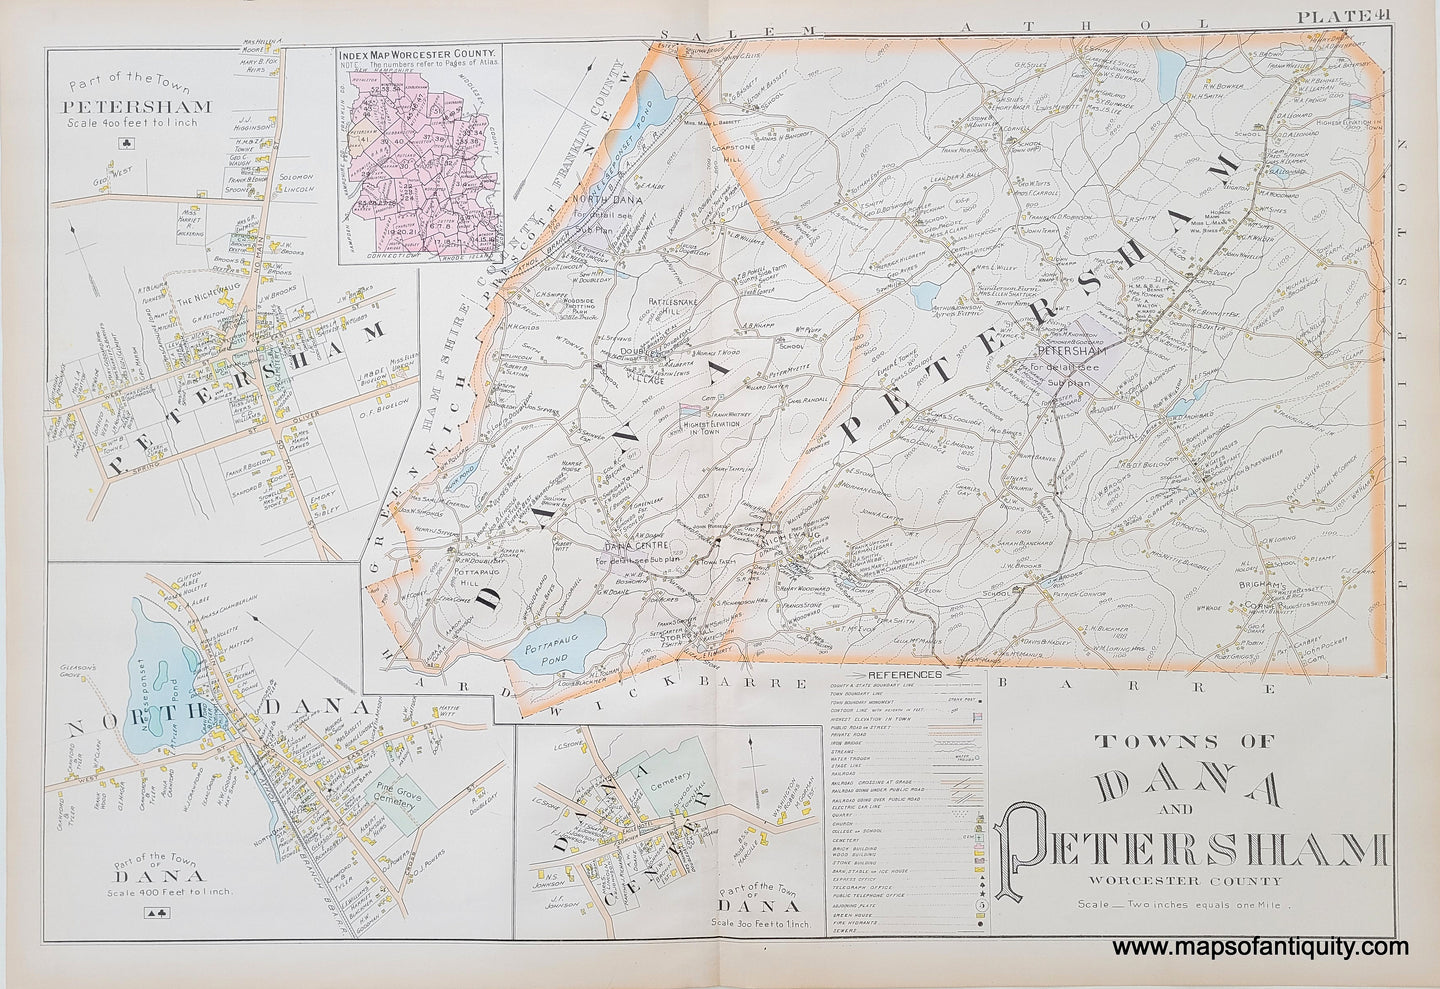 MAS1277-Antique-Map-Towns-of-Dana-and-Petersham-Plate-41-Worcester-County-Massachusetts-1898-Richards